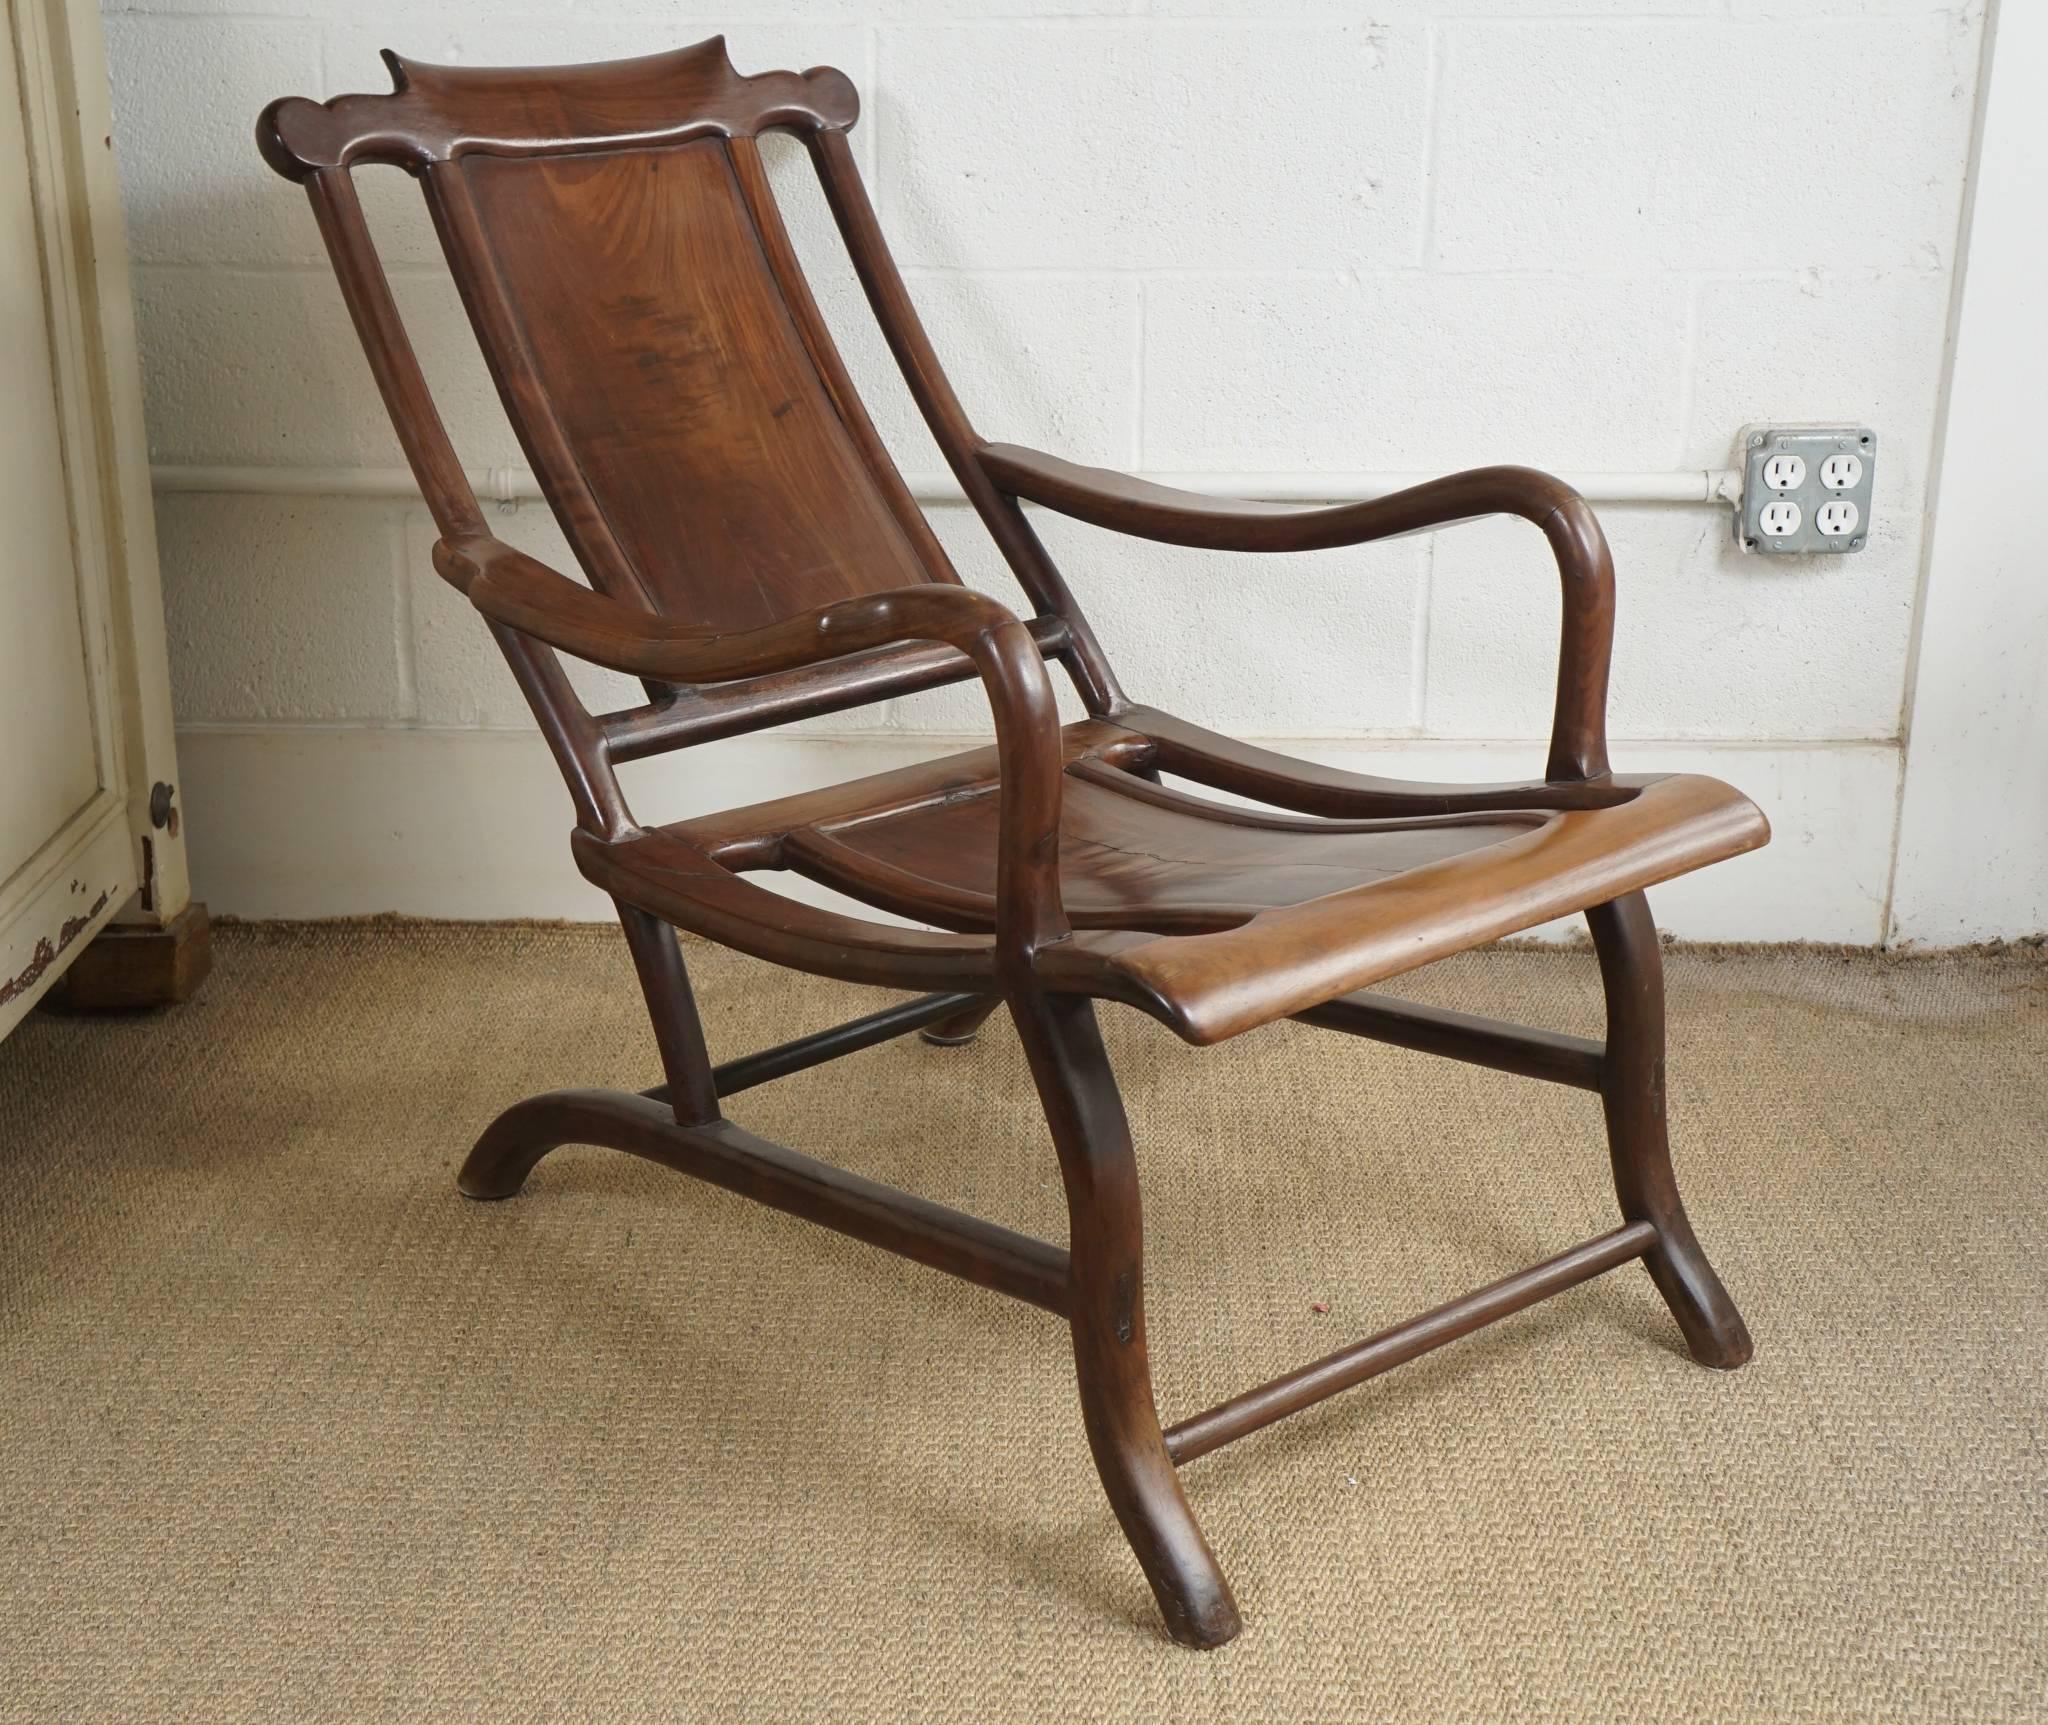 Here is a gorgeous and sculptural Chinese plantation chair in a rich walnut 